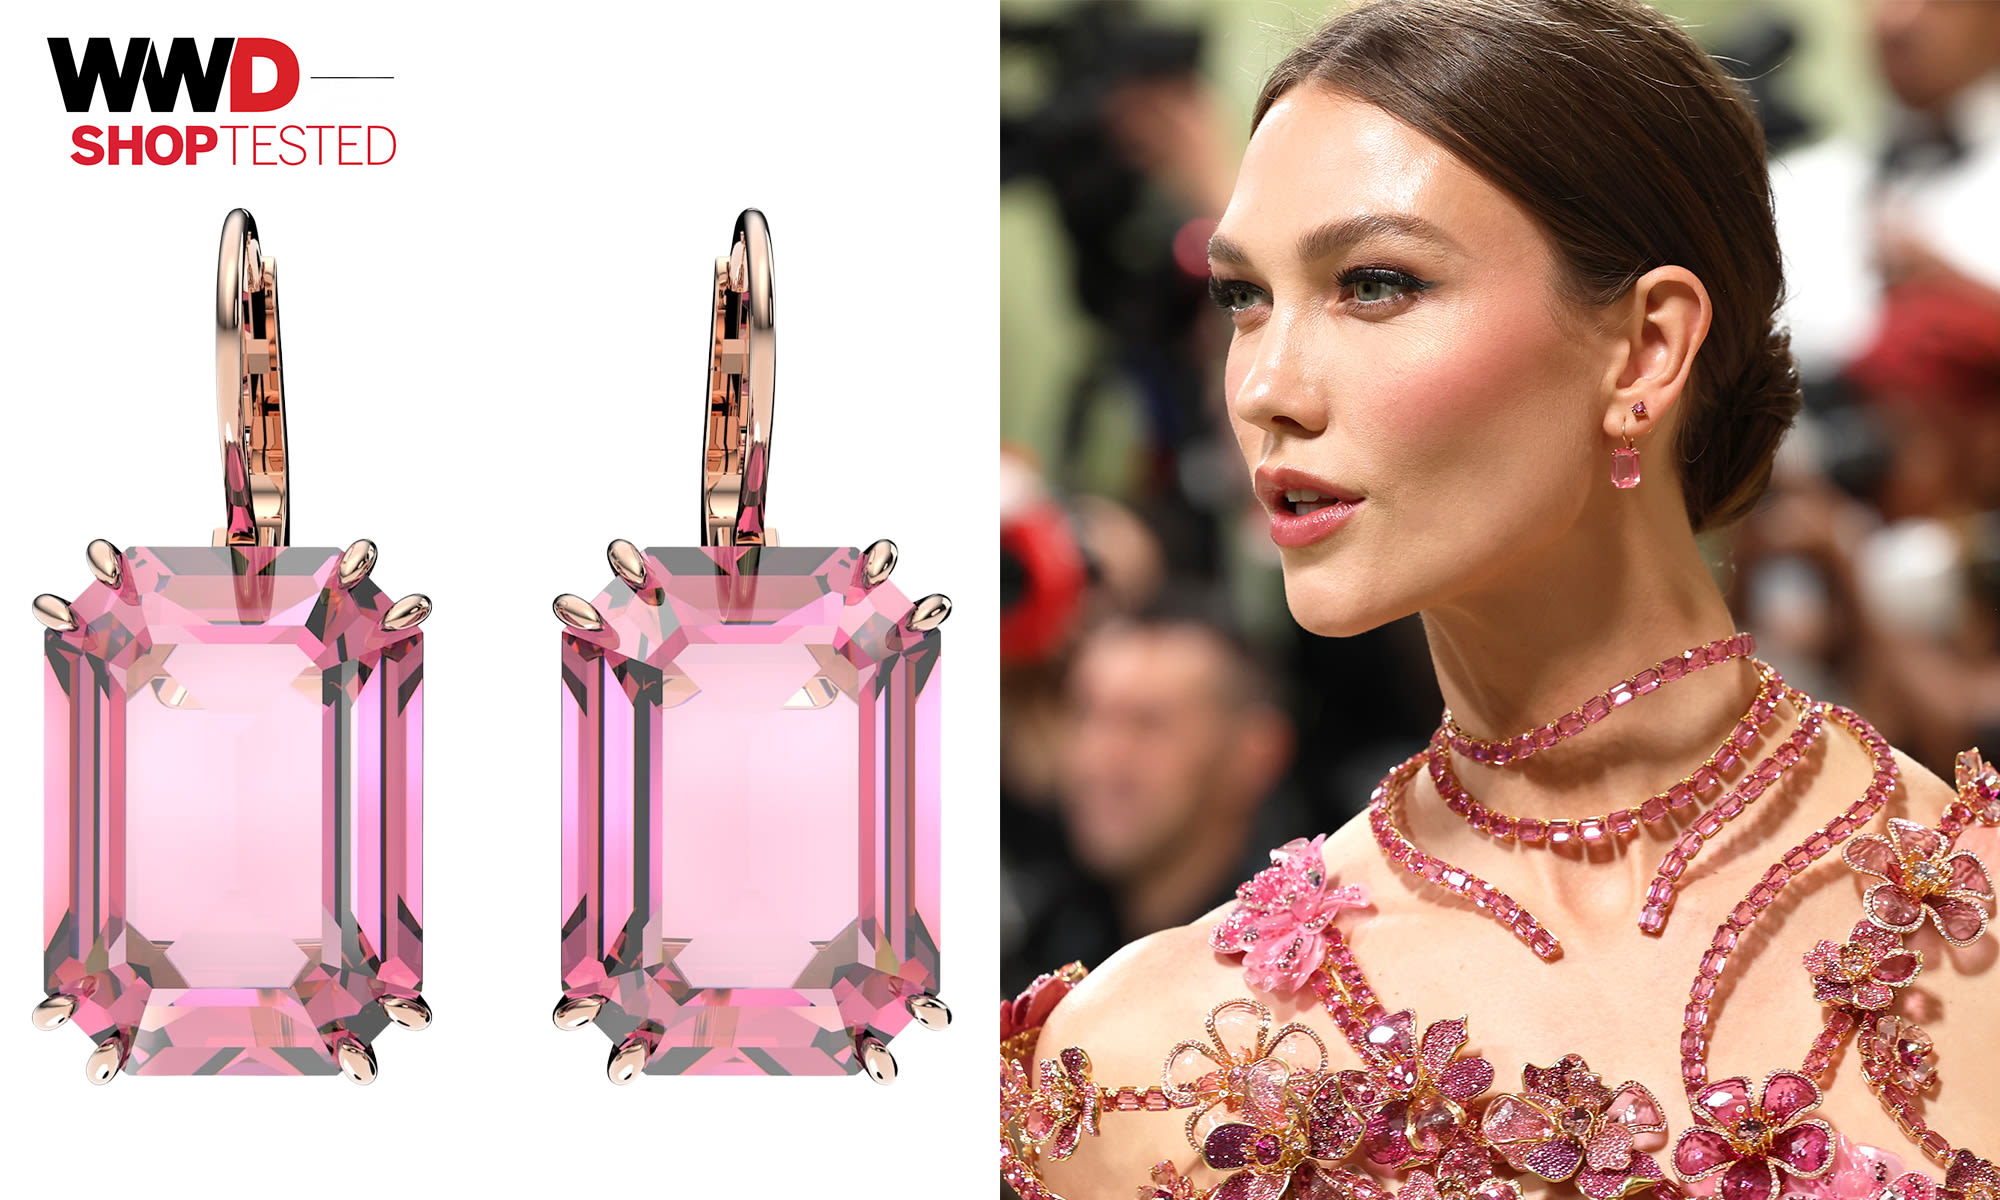 Here’s Where You Can Buy Karlie Kloss’ Showstopping $130 Pink Met Gala Earrings for Mother’s Day